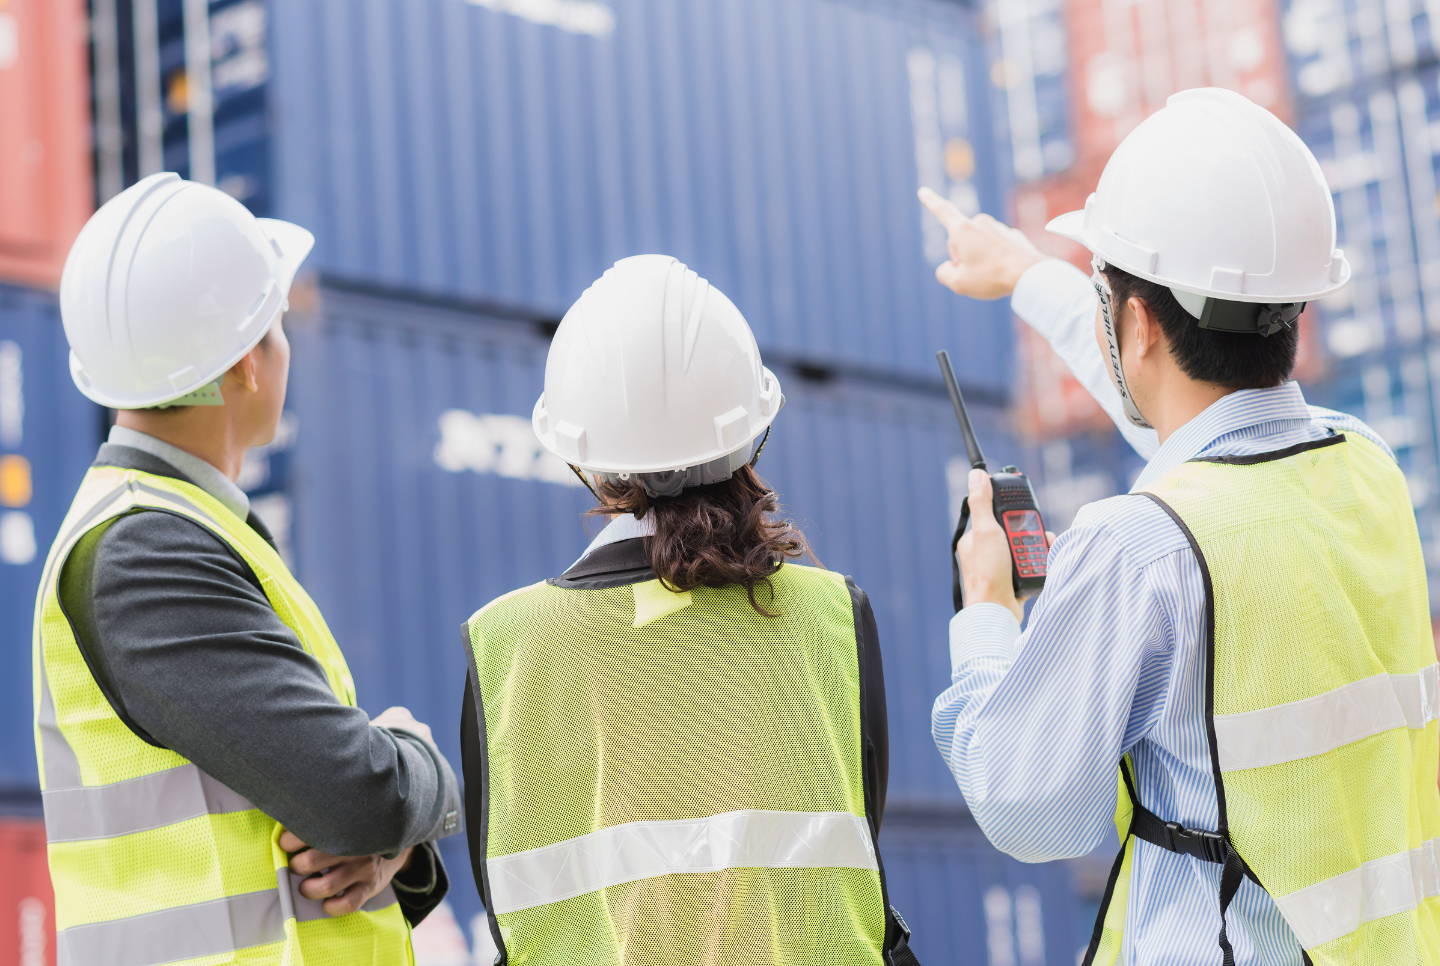 Shippers taking a look at their containers. For shippers to deliver on the expectations of the businesses, a solution is needed that covers their blind spots over the supply chain.